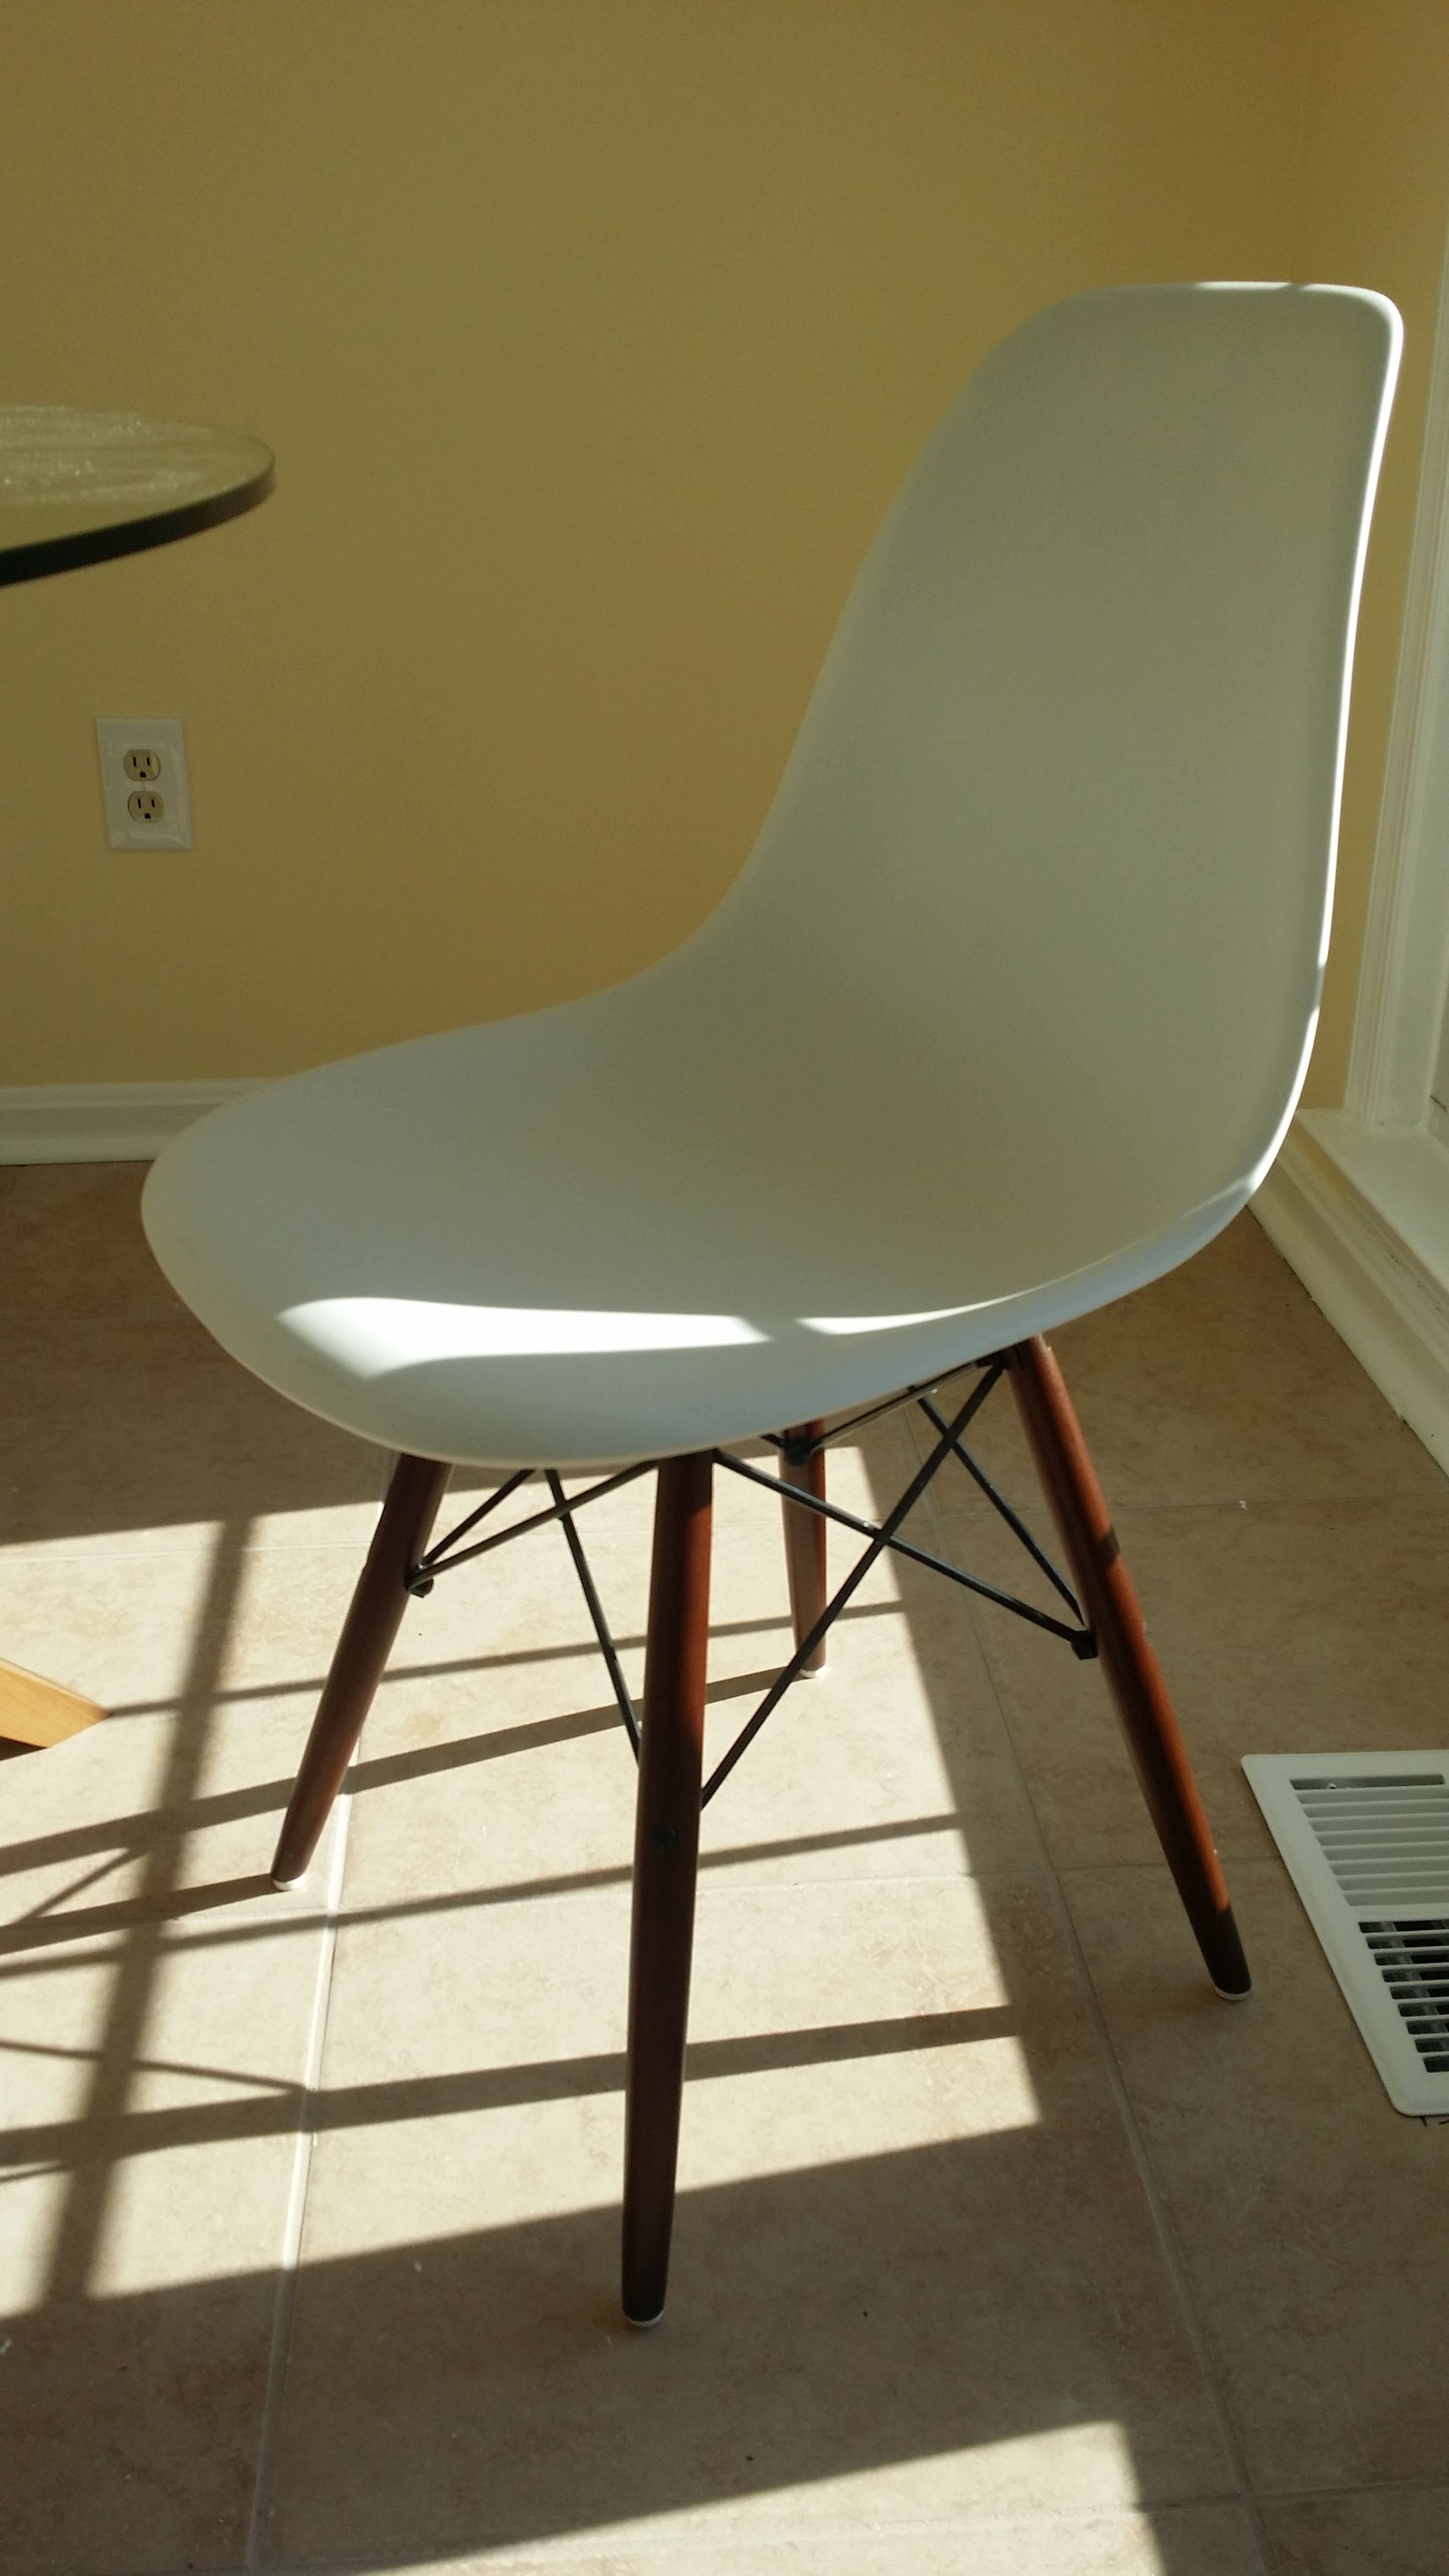 Set of 4 New white Chairs in box